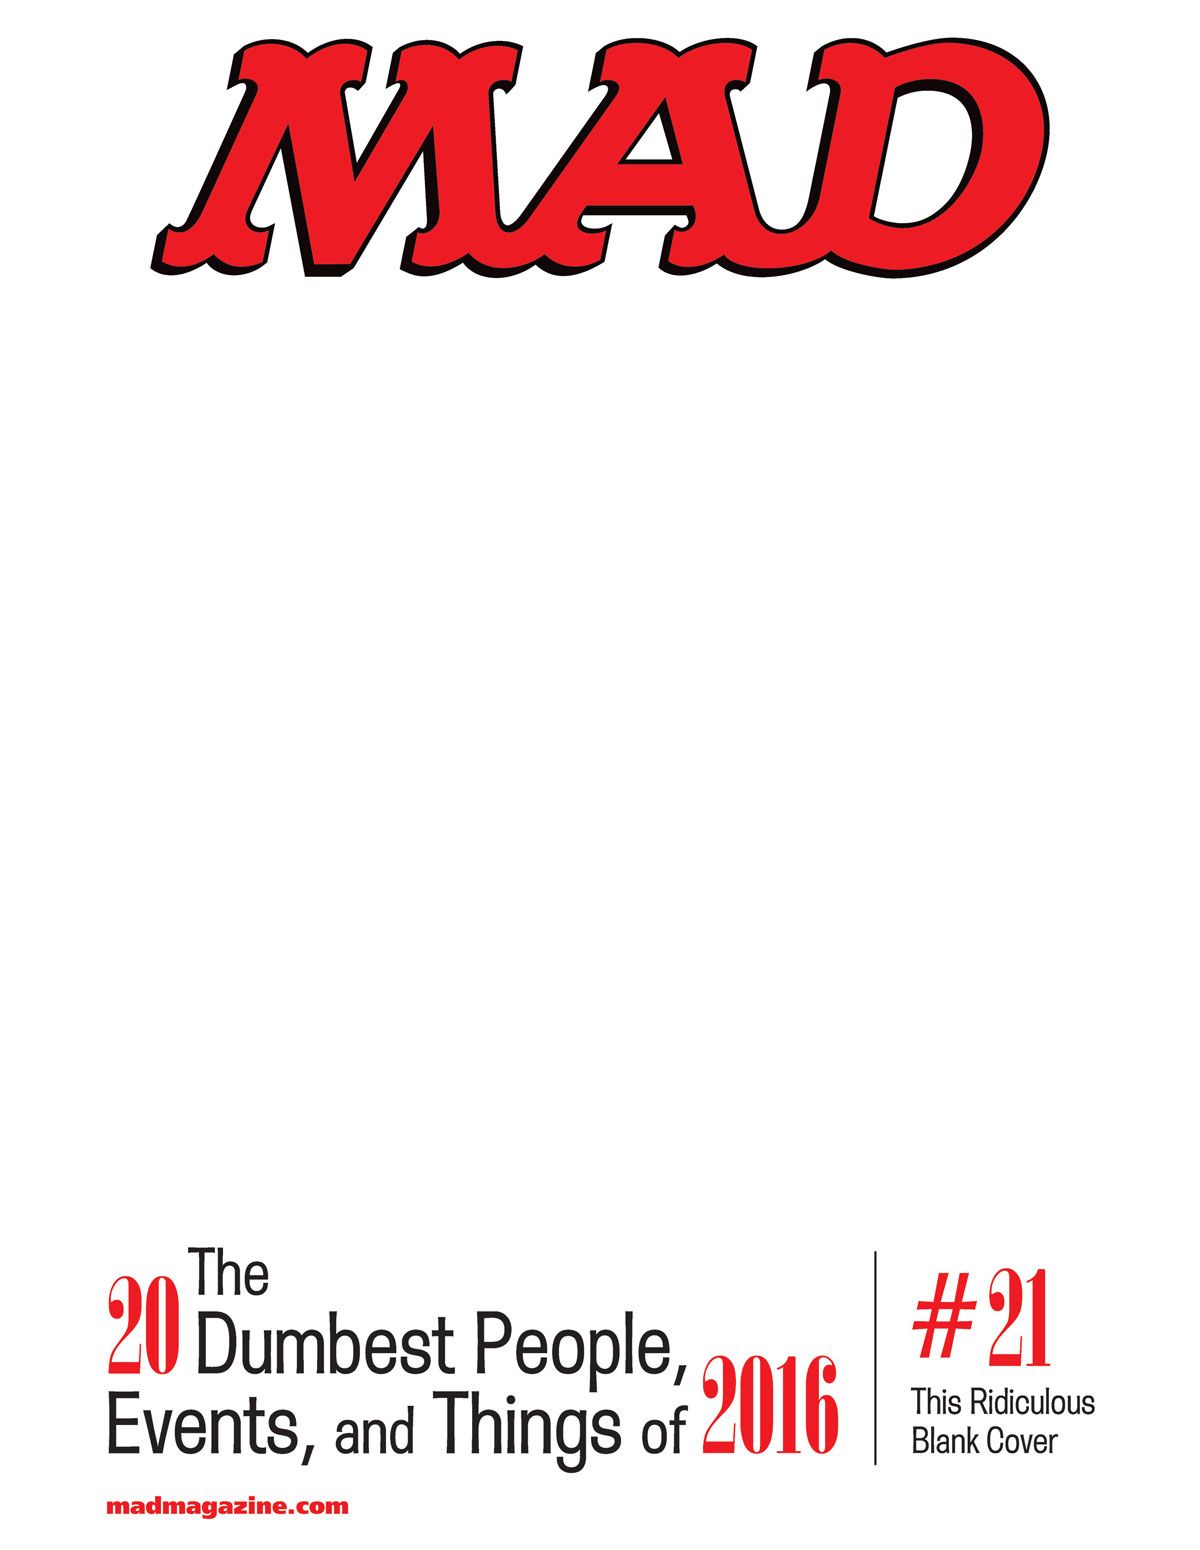 mad_543_blank_cover